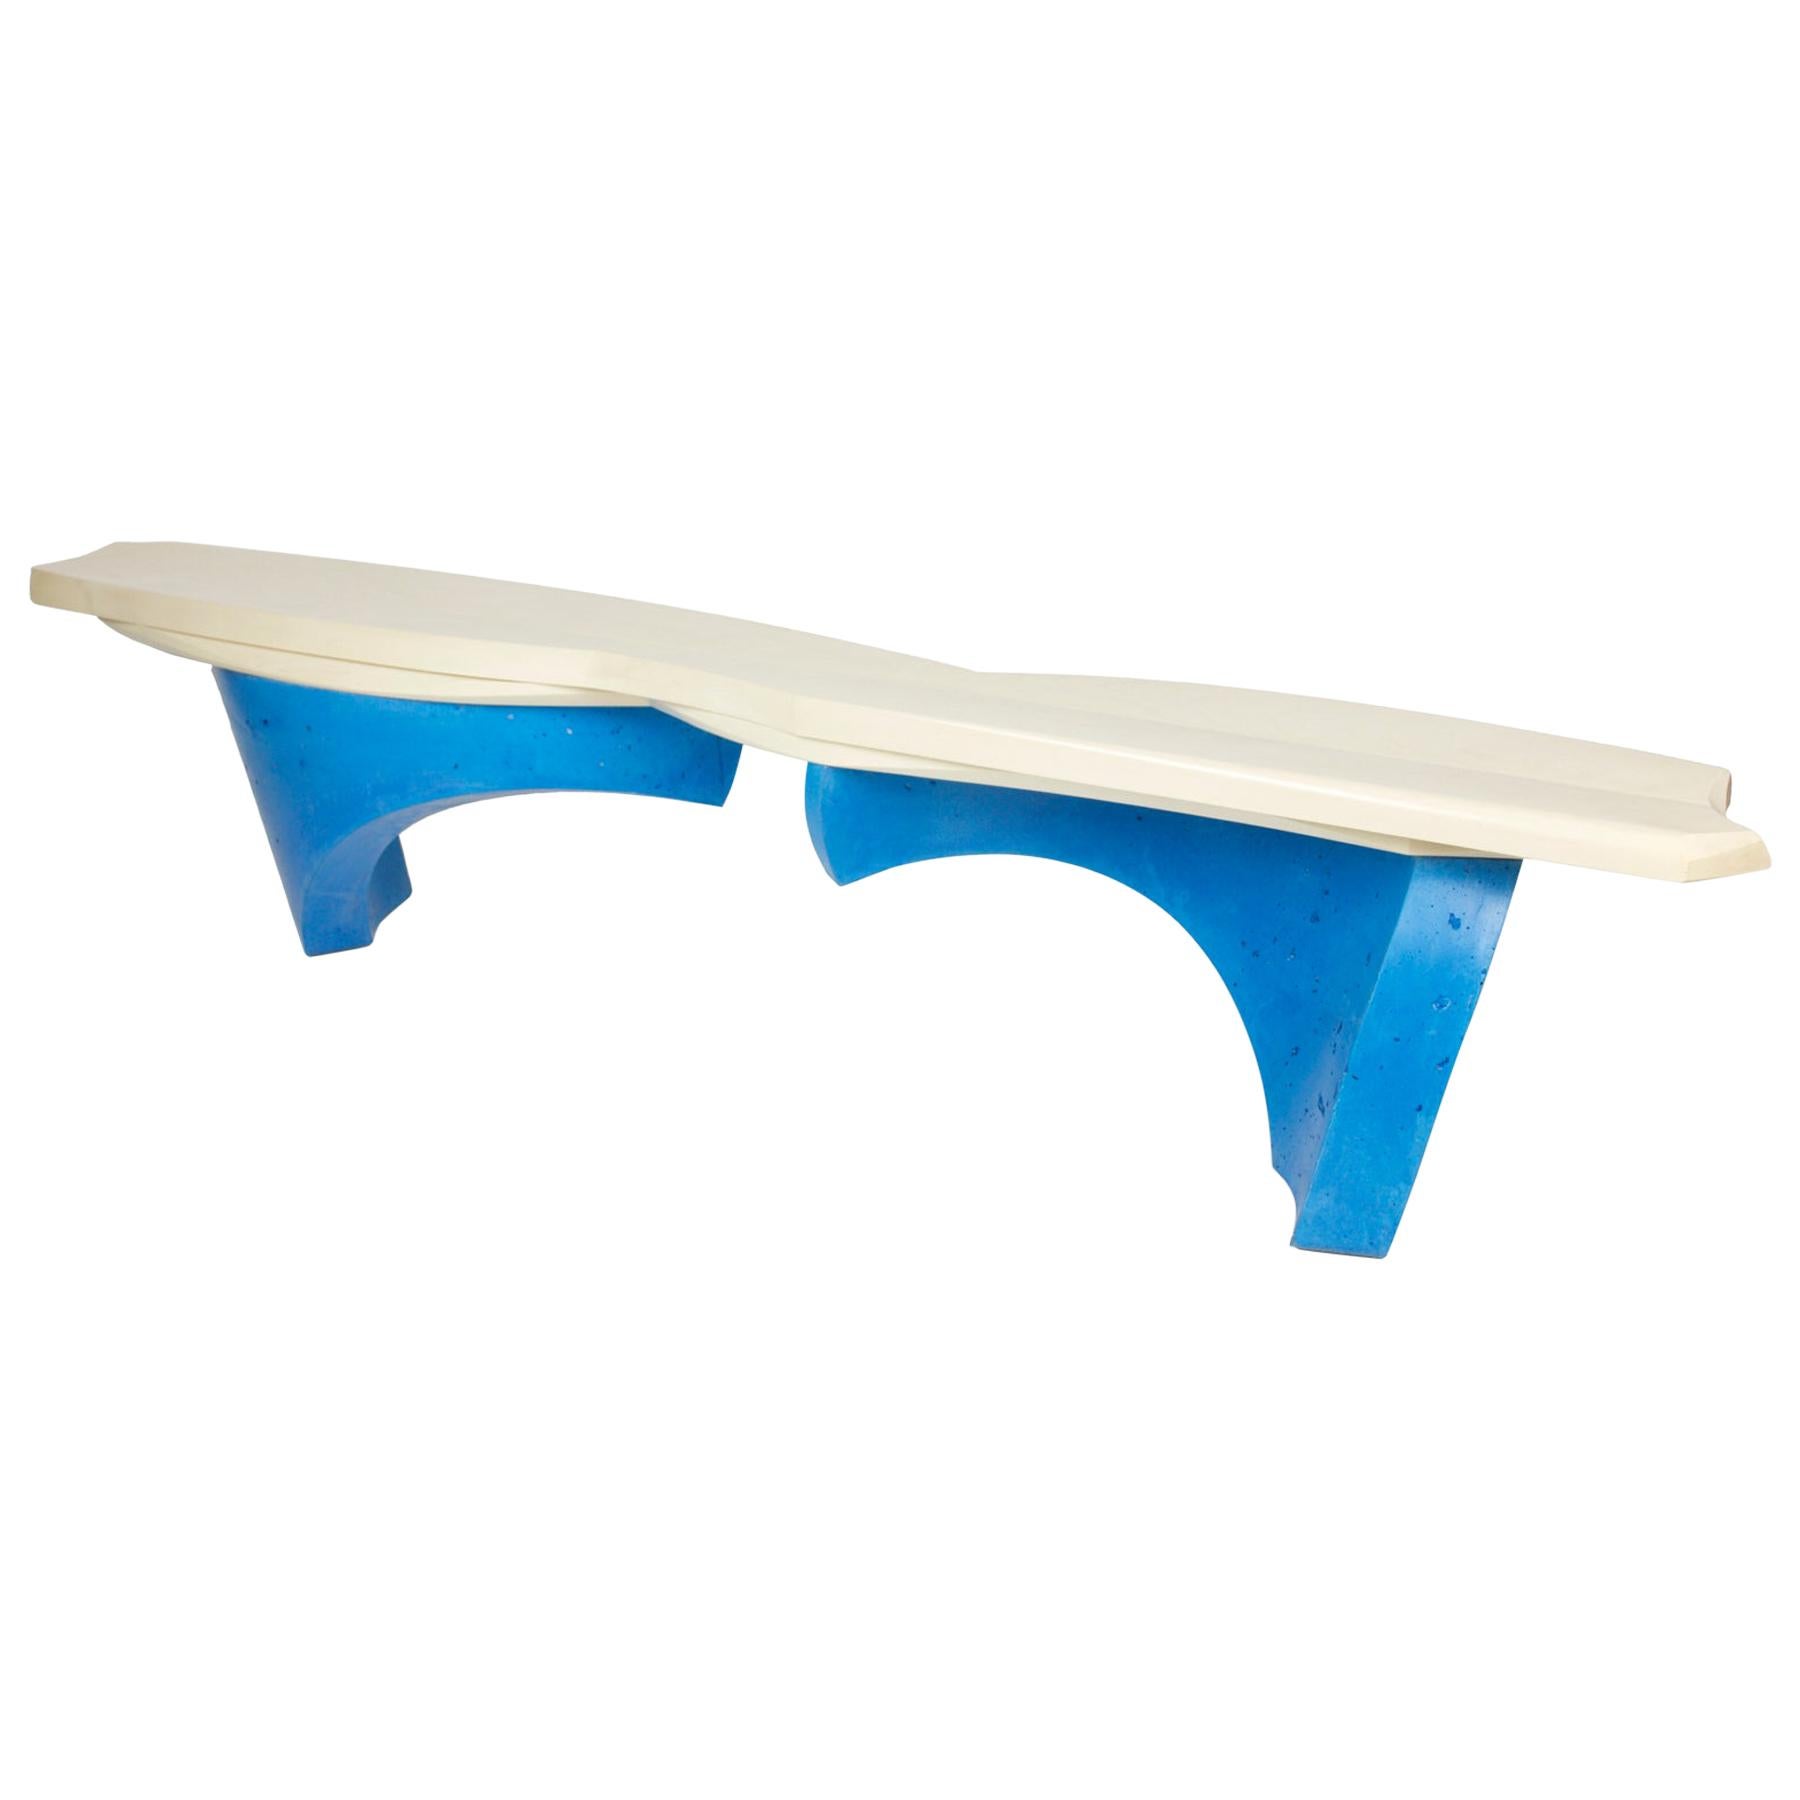 Waves Bench featuring Blue Cast Concrete and Bleached Maple by Nico Yektai For Sale